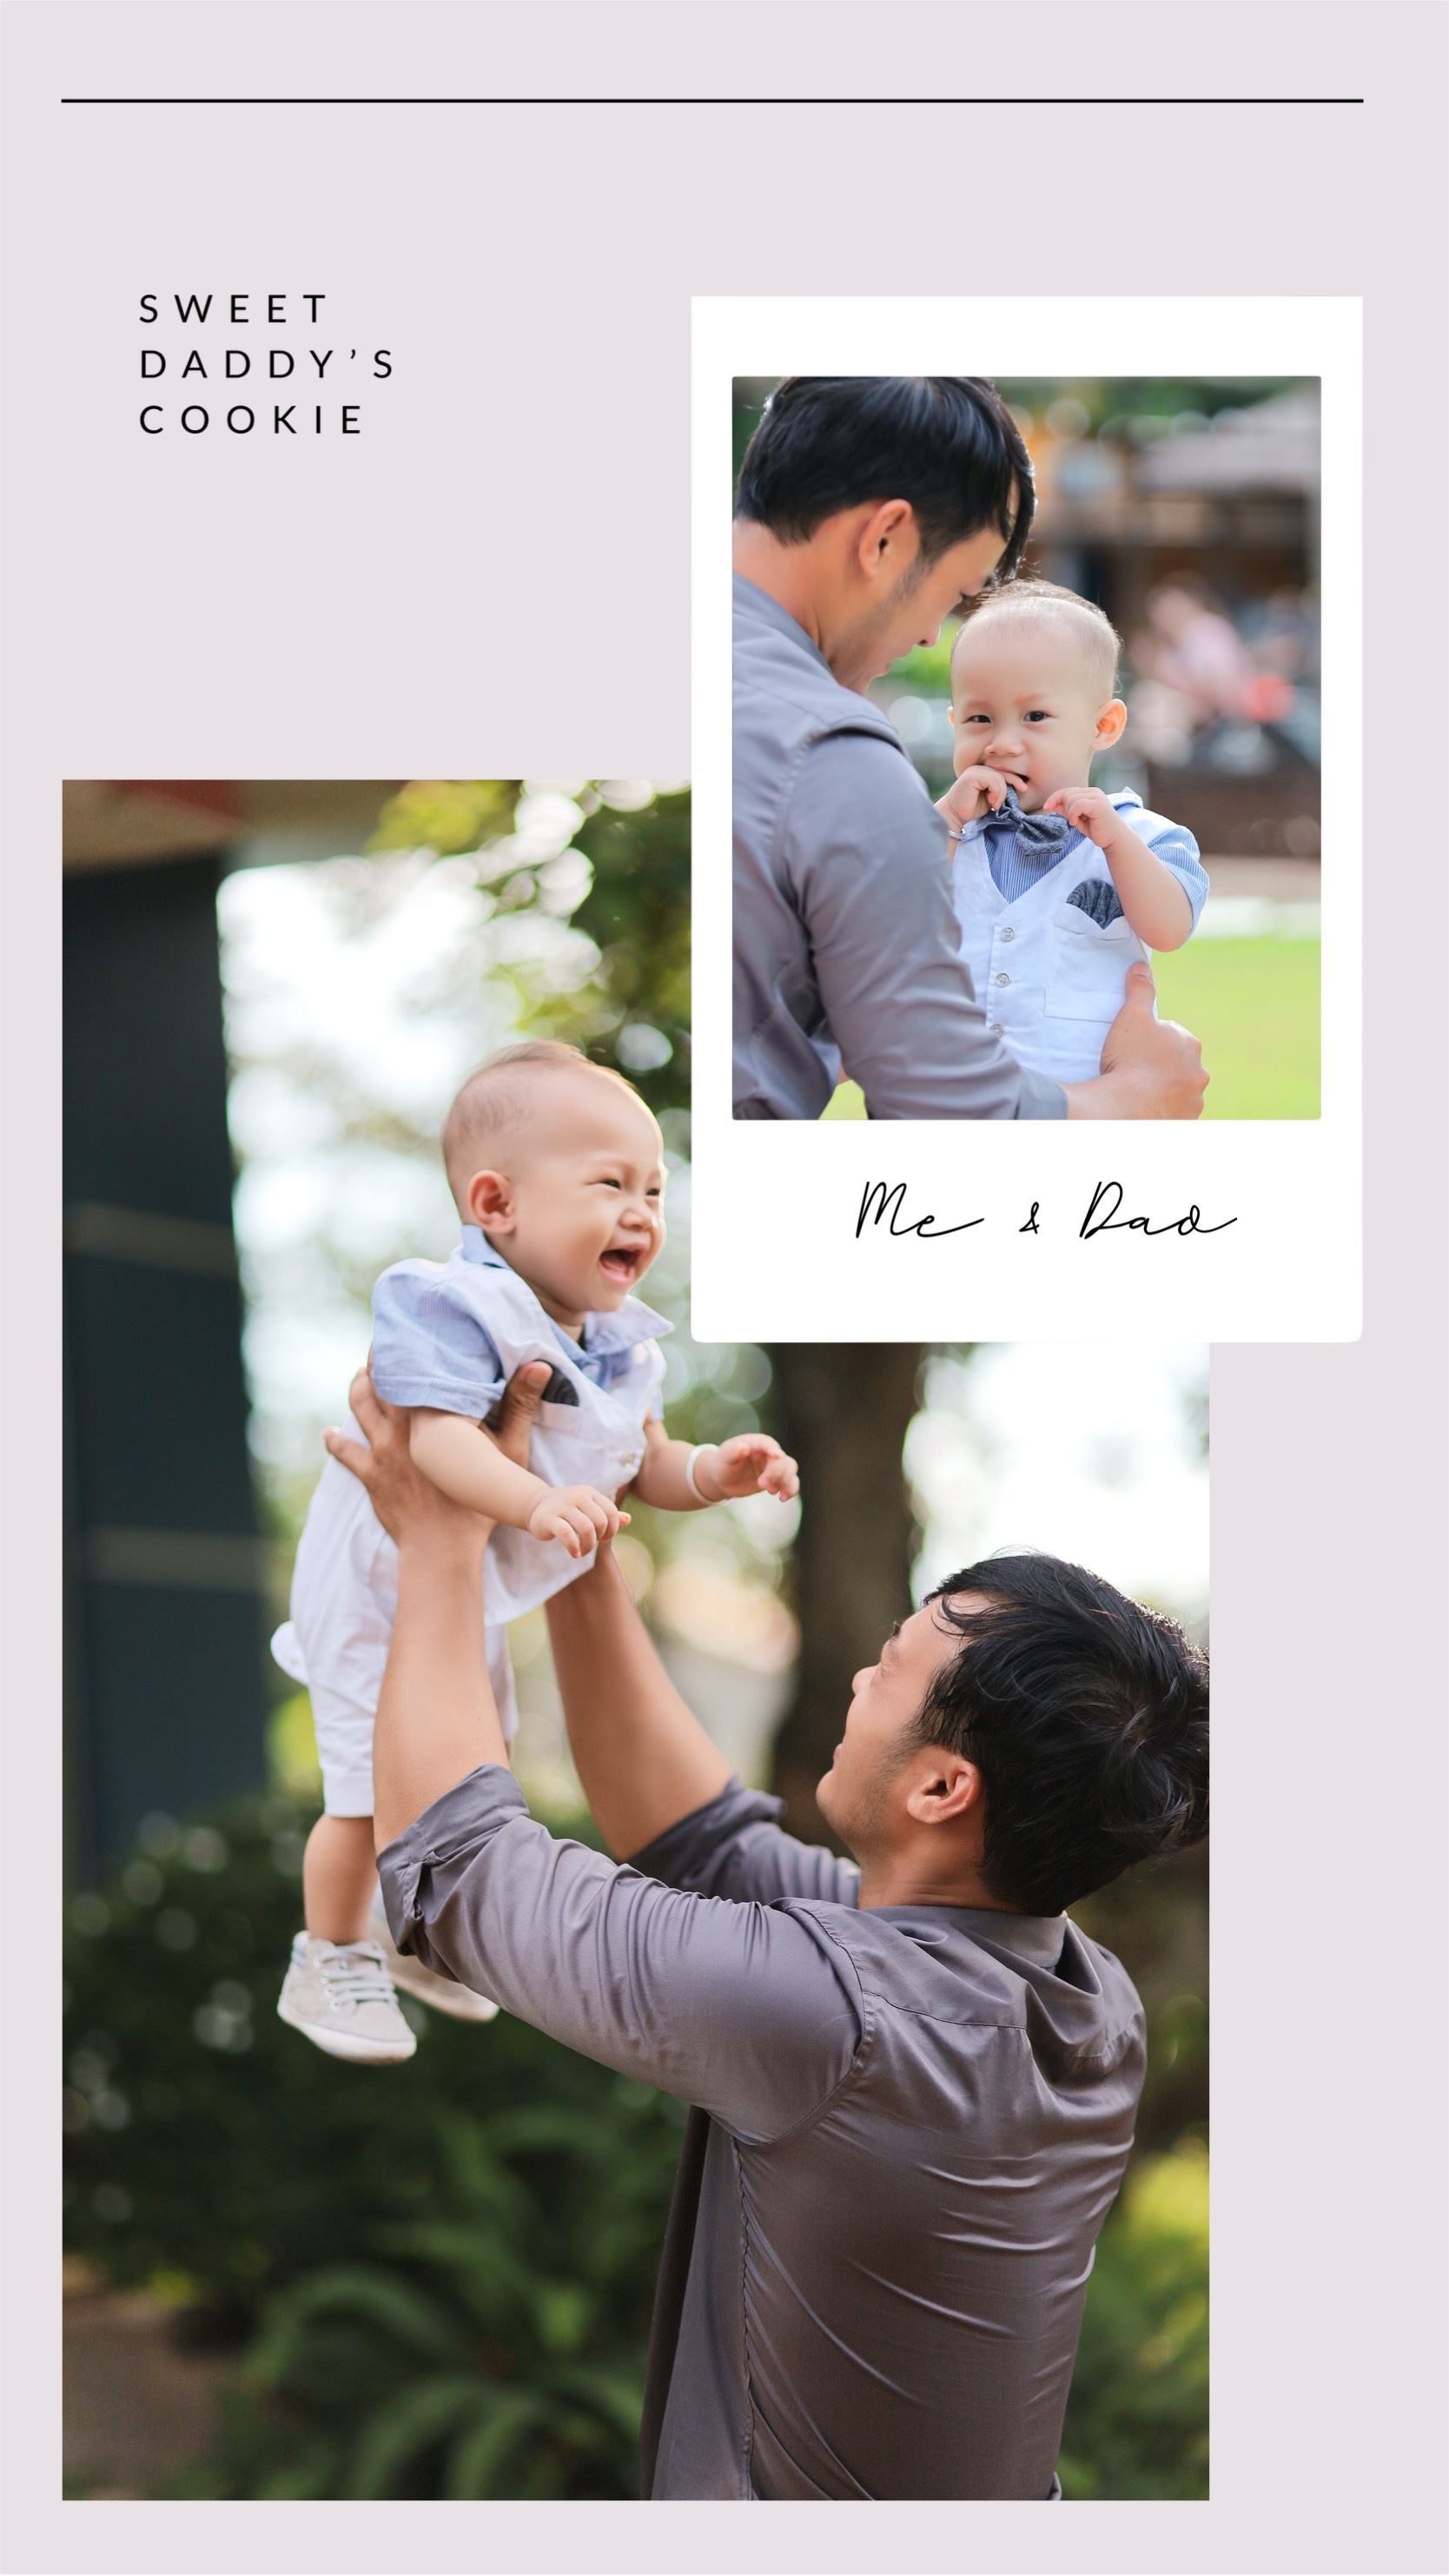 Asian family son and dad outdoors Instagram story template